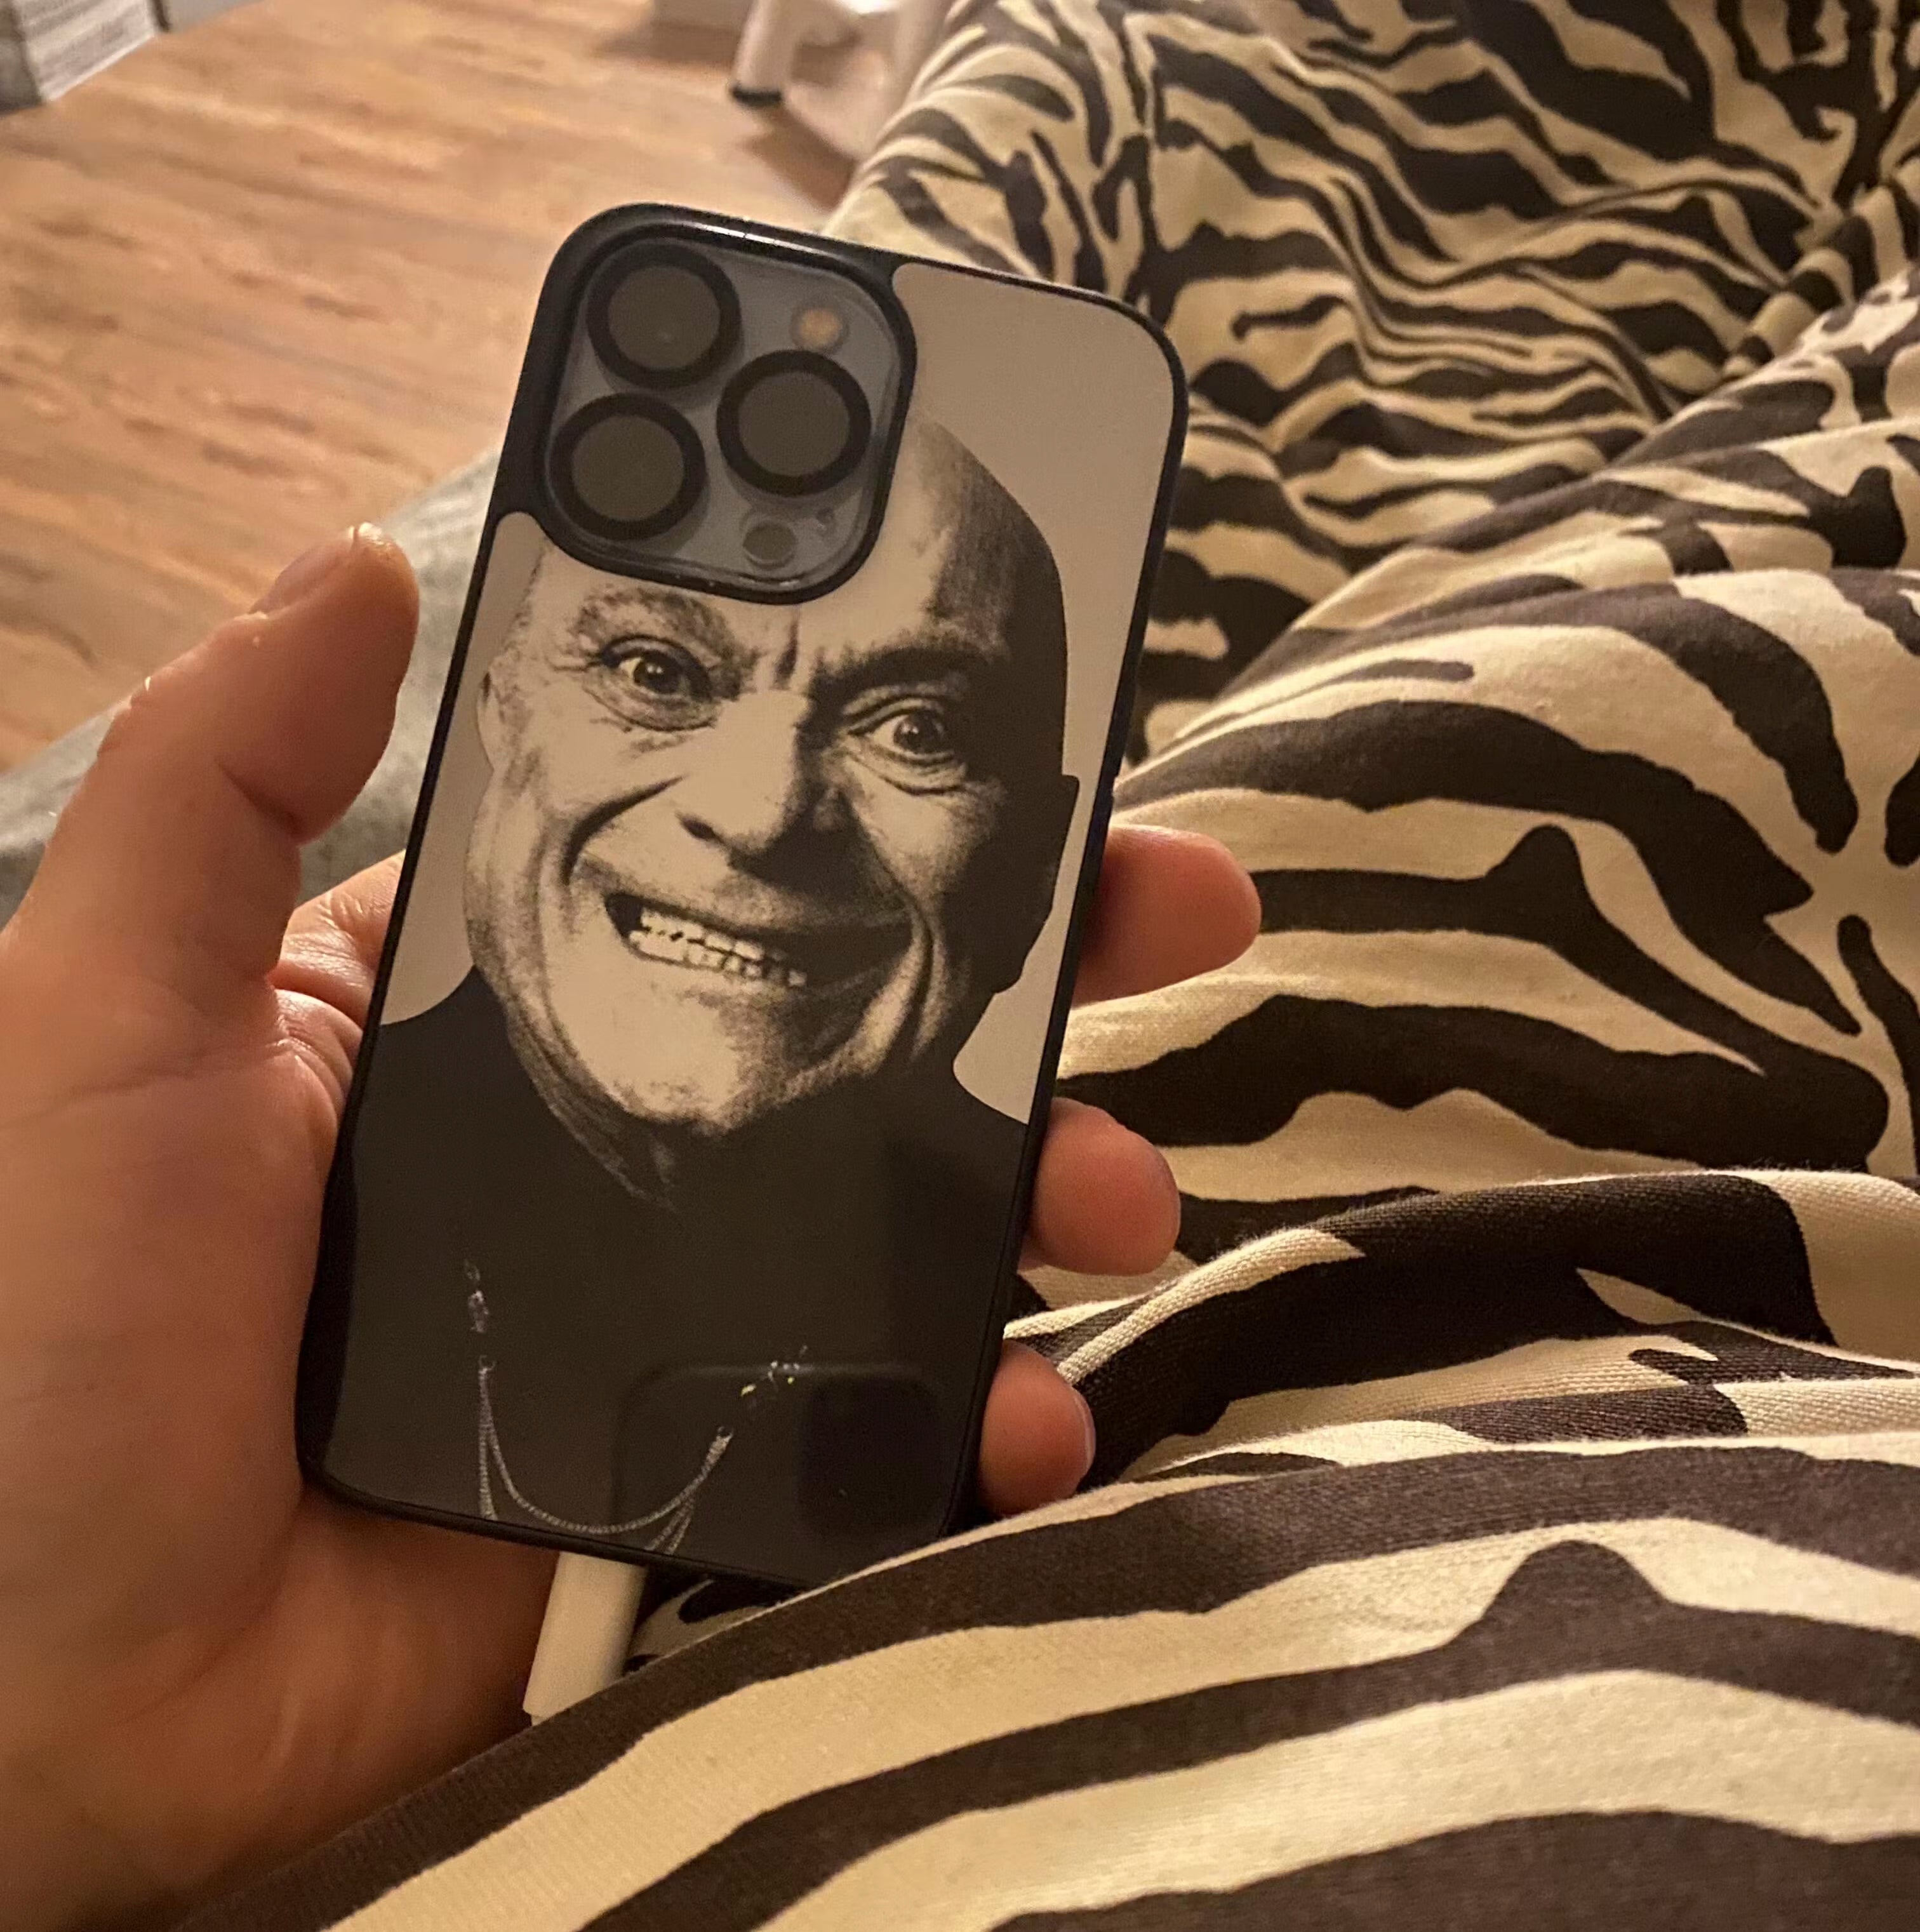 A custom apple iphone case with a man smiling on it.